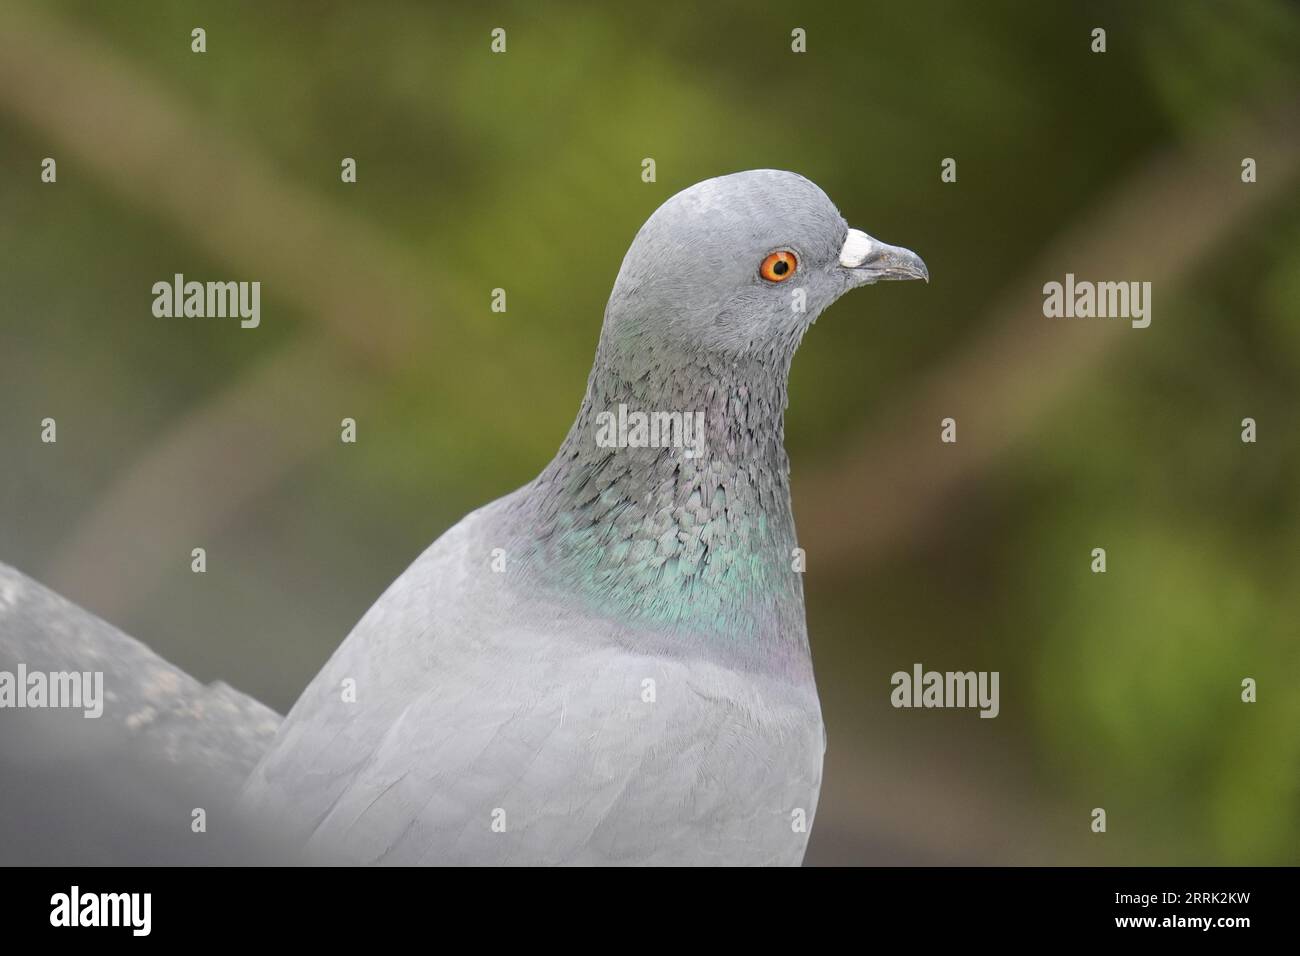 A gray color dove sitting on a ledge in front of a blurred green background. Focus on beautiful pigeon eye Stock Photo